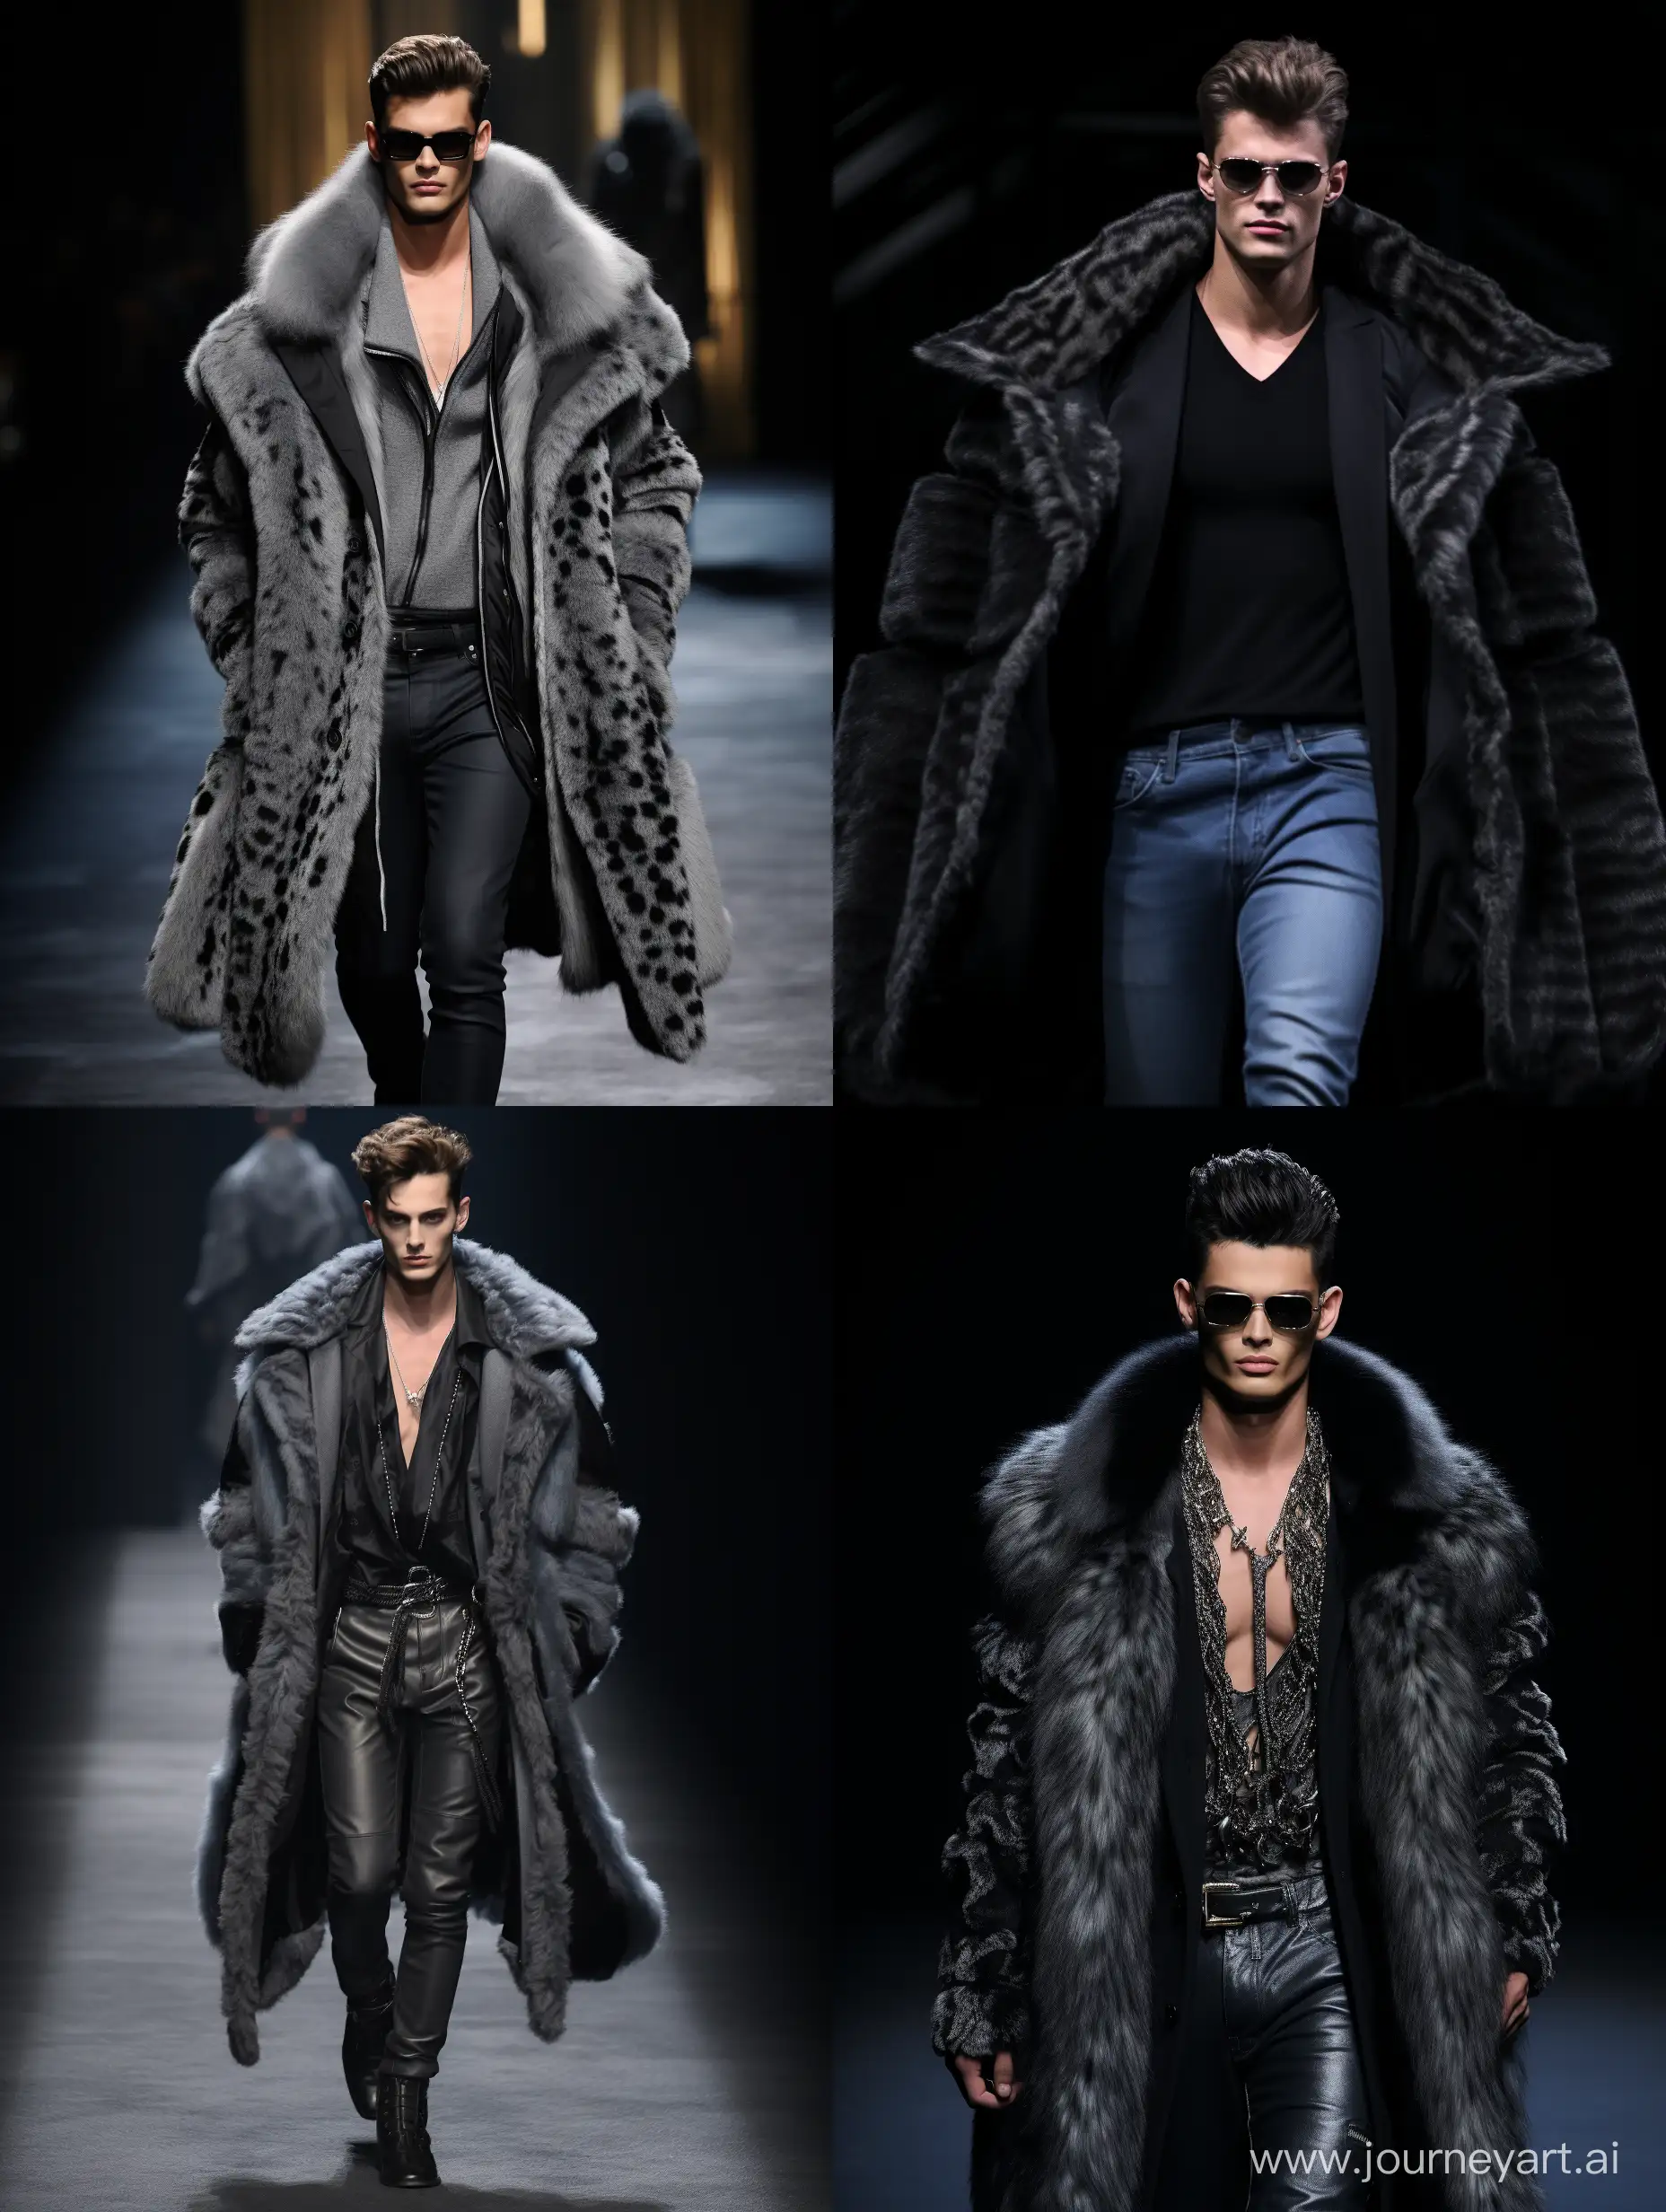 Fashionable-Male-Model-Showcasing-Handsome-Runway-Style-with-Vison-Mink-Jewelry